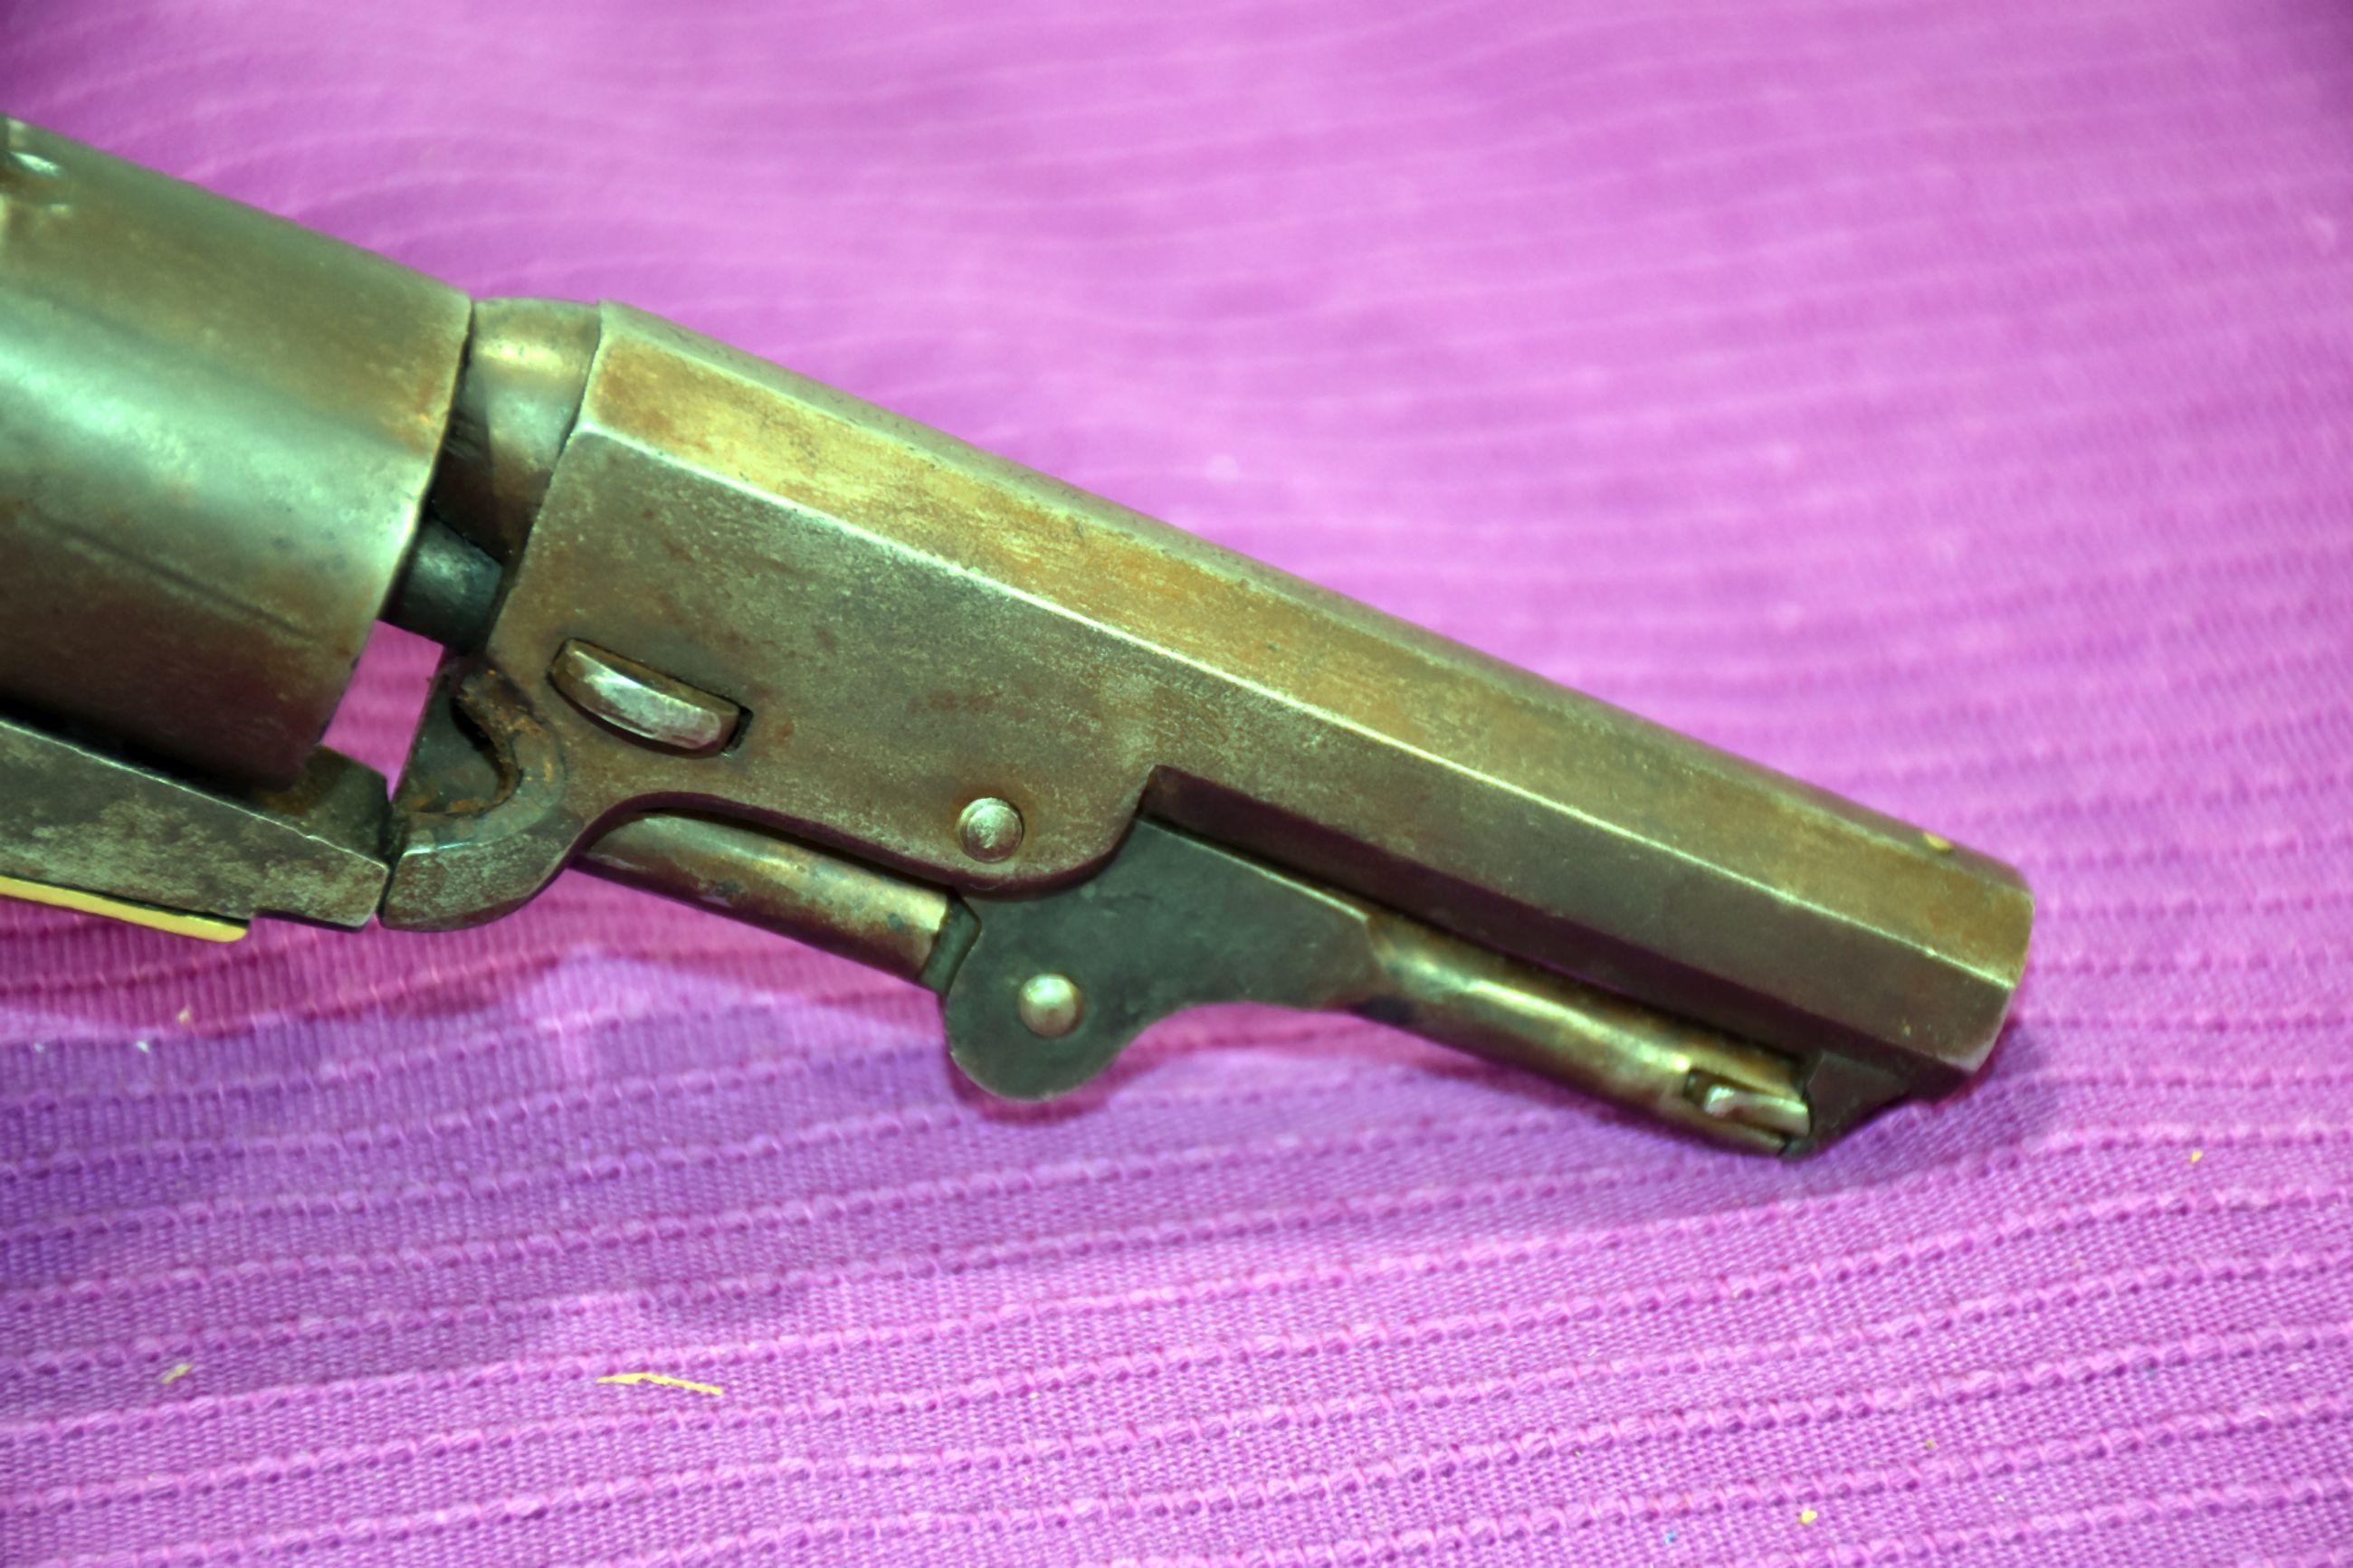 Colt 1849 Pocket pistol in .31 Cap & Ball. SN: 289068, Made in 1866 Good Antique Condition. This Col